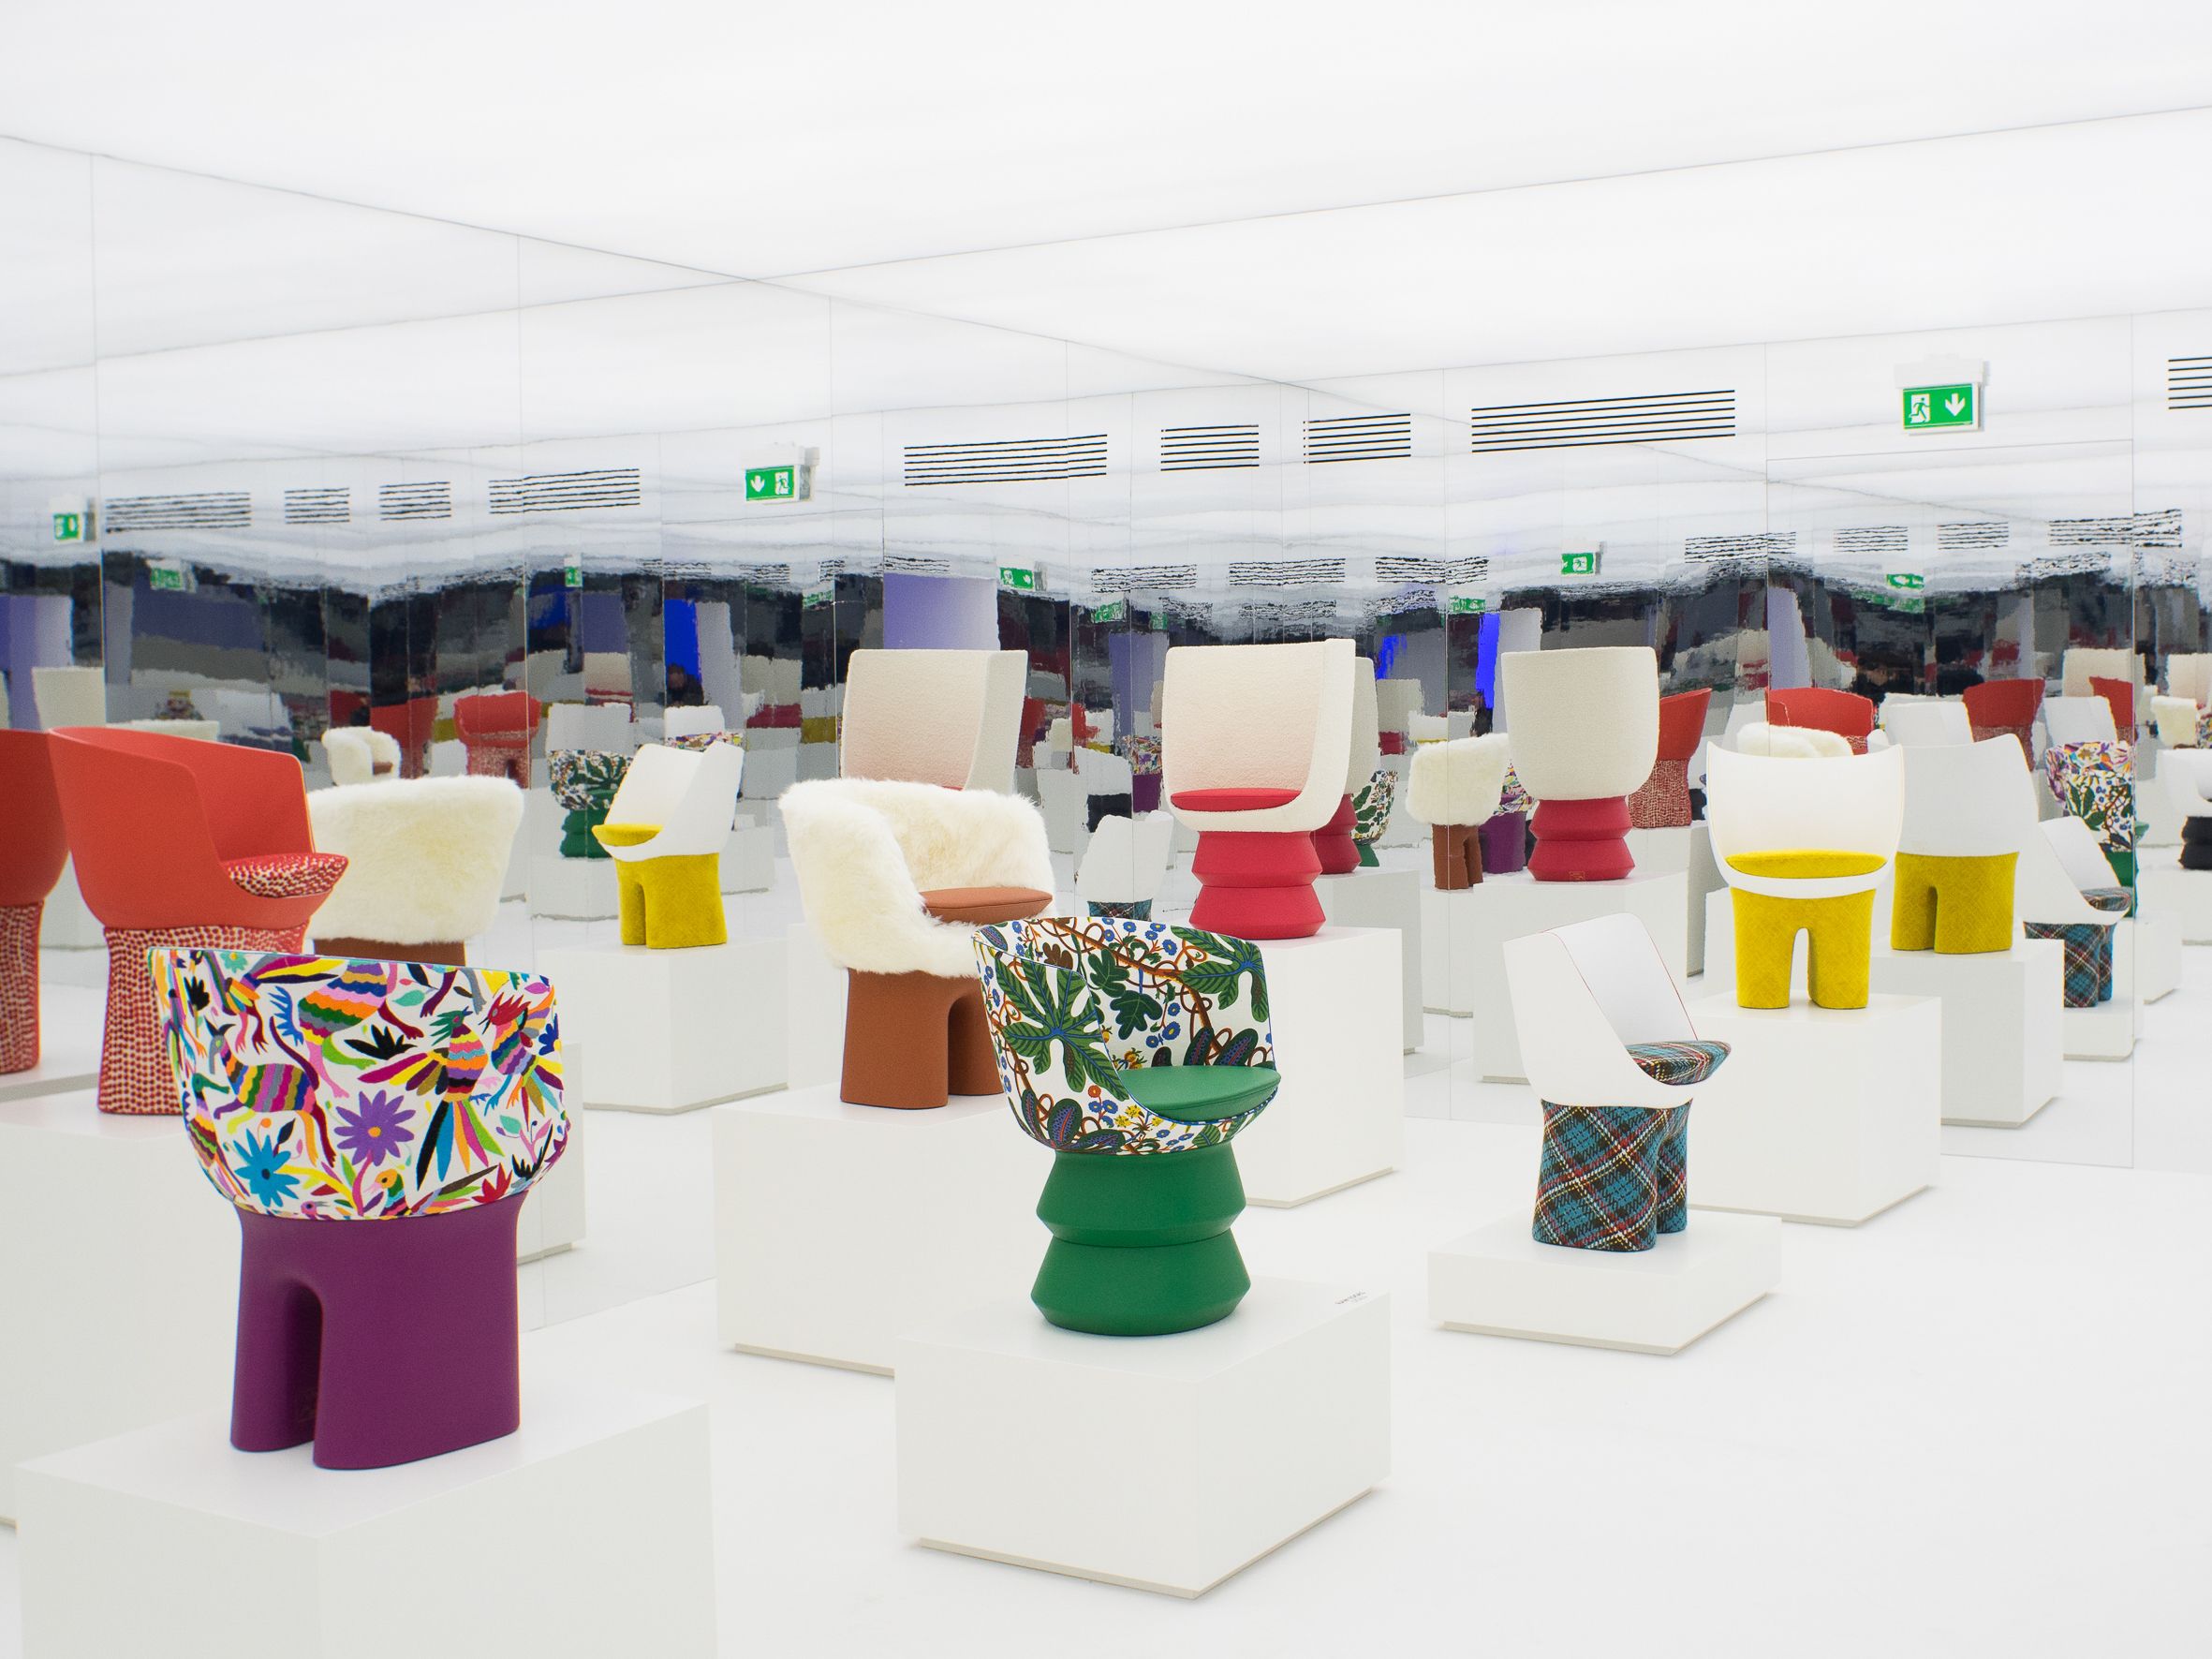 Louis Vuitton, Objets Nomades: Magnificent Event At Fuorisalone 2019 -  Inspiration Design Books Blog